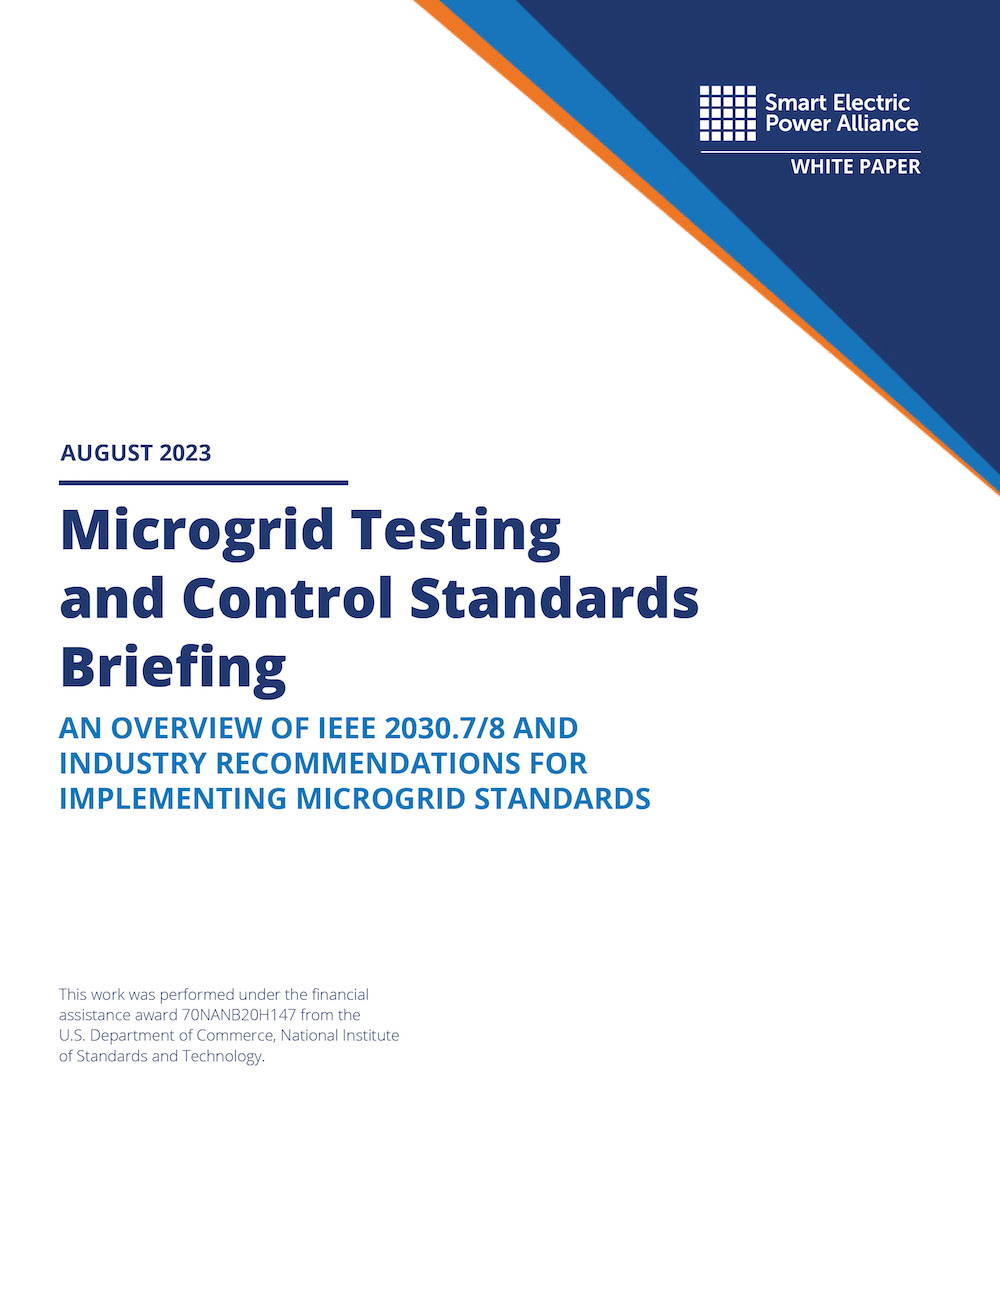 Microgrid Testing and Control Standards Briefing: An Overview of IEEE 2030.7/8 and Industry Recommendations for Implementing Microgrid Standards